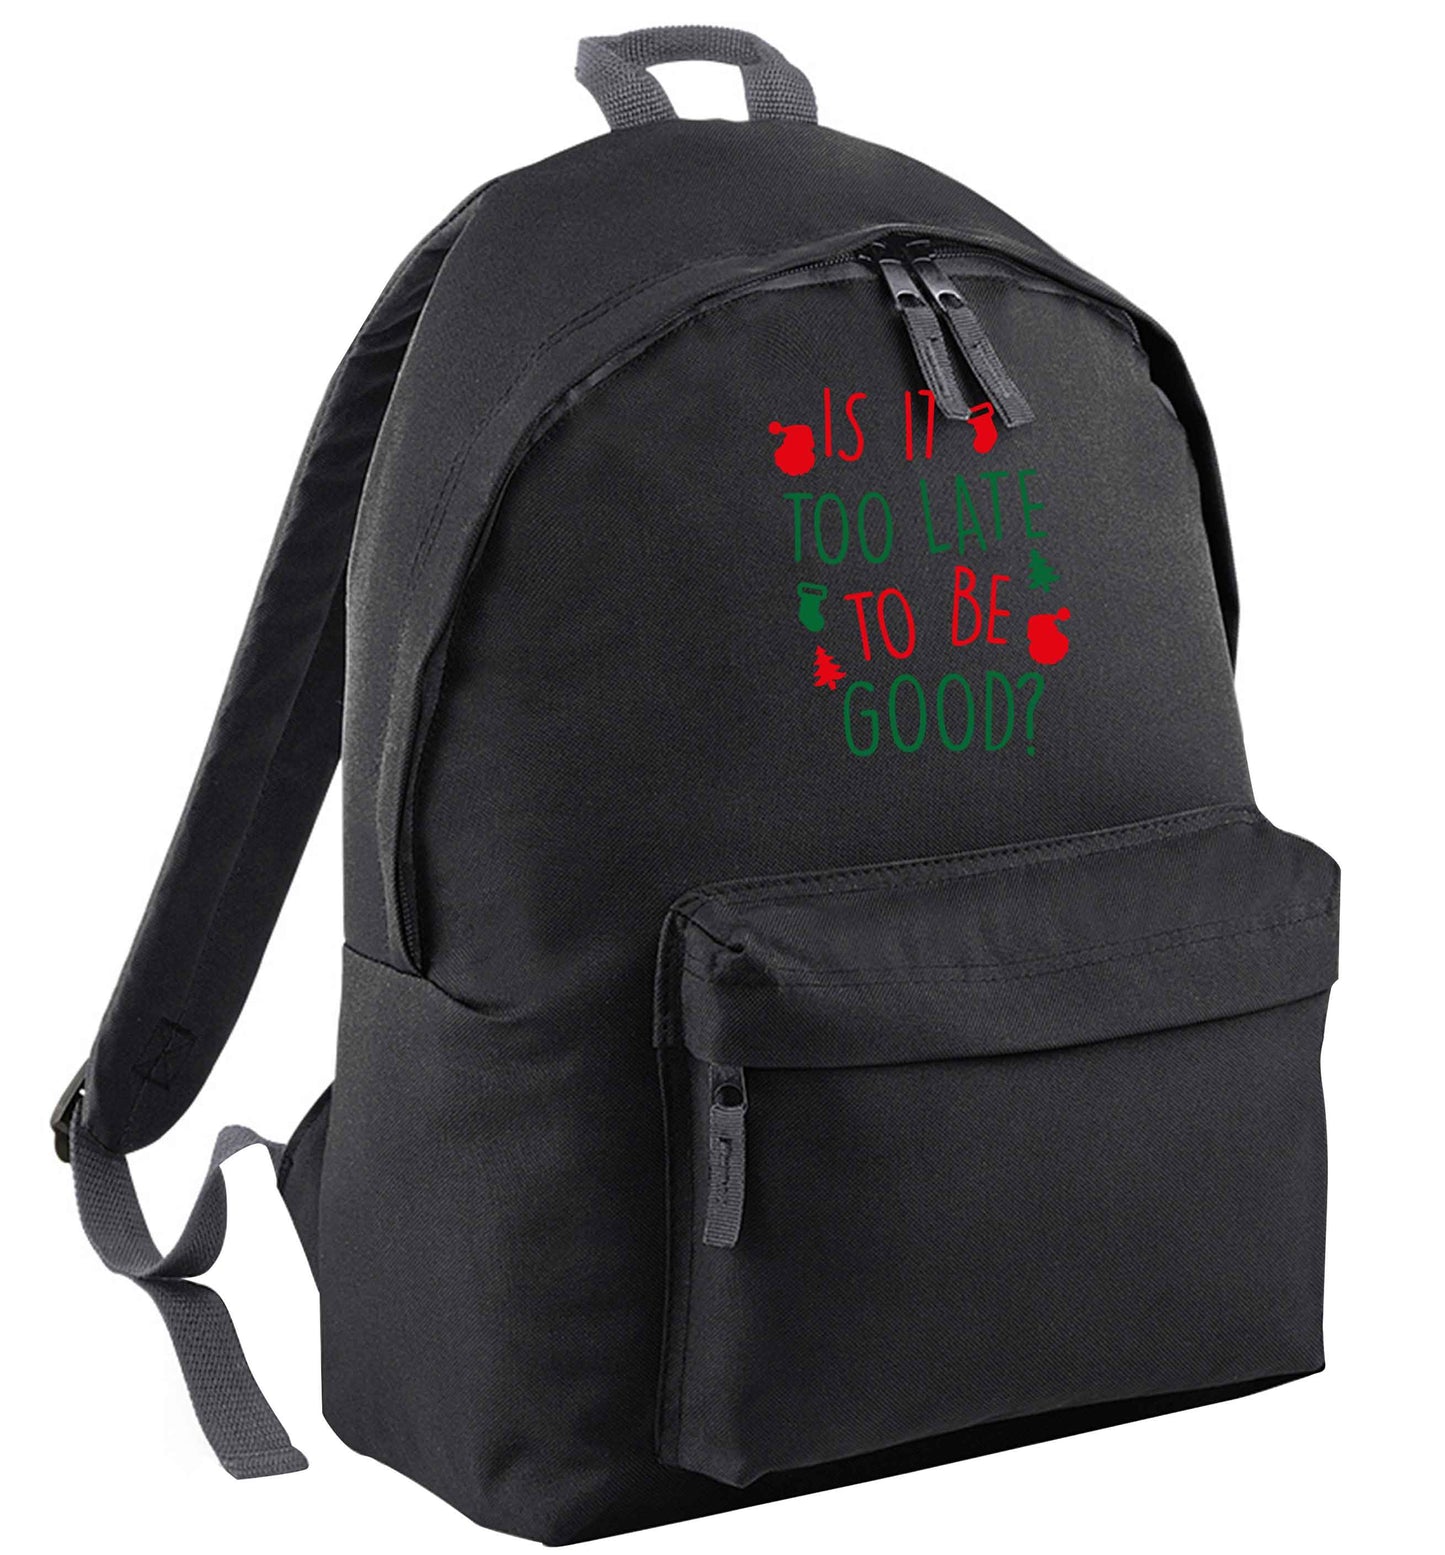 Too Late to be Good black adults backpack